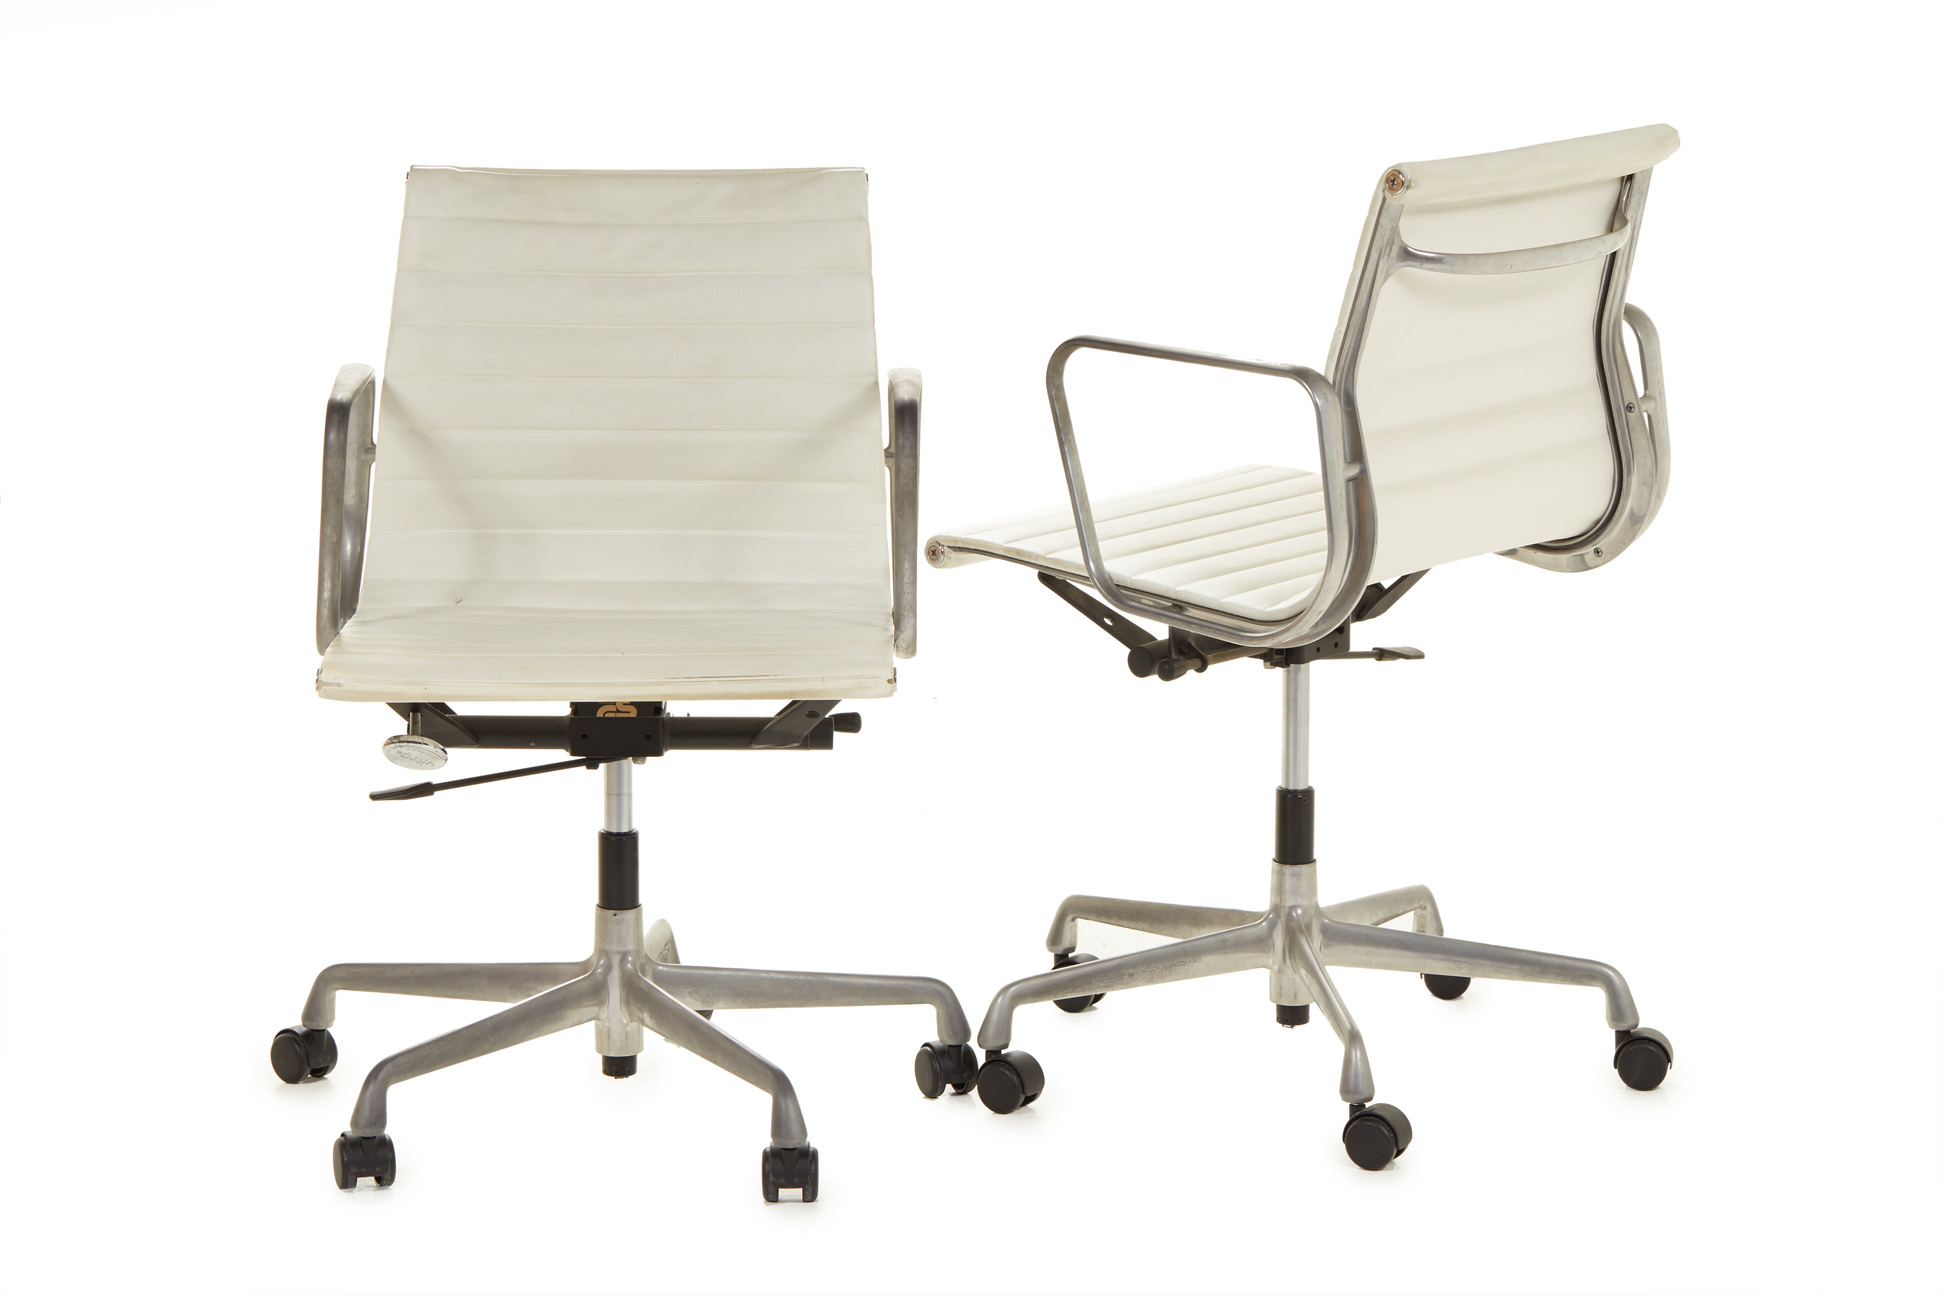 A PAIR OF HERMAN MILLER EAMES CHAIRS - Image 2 of 4